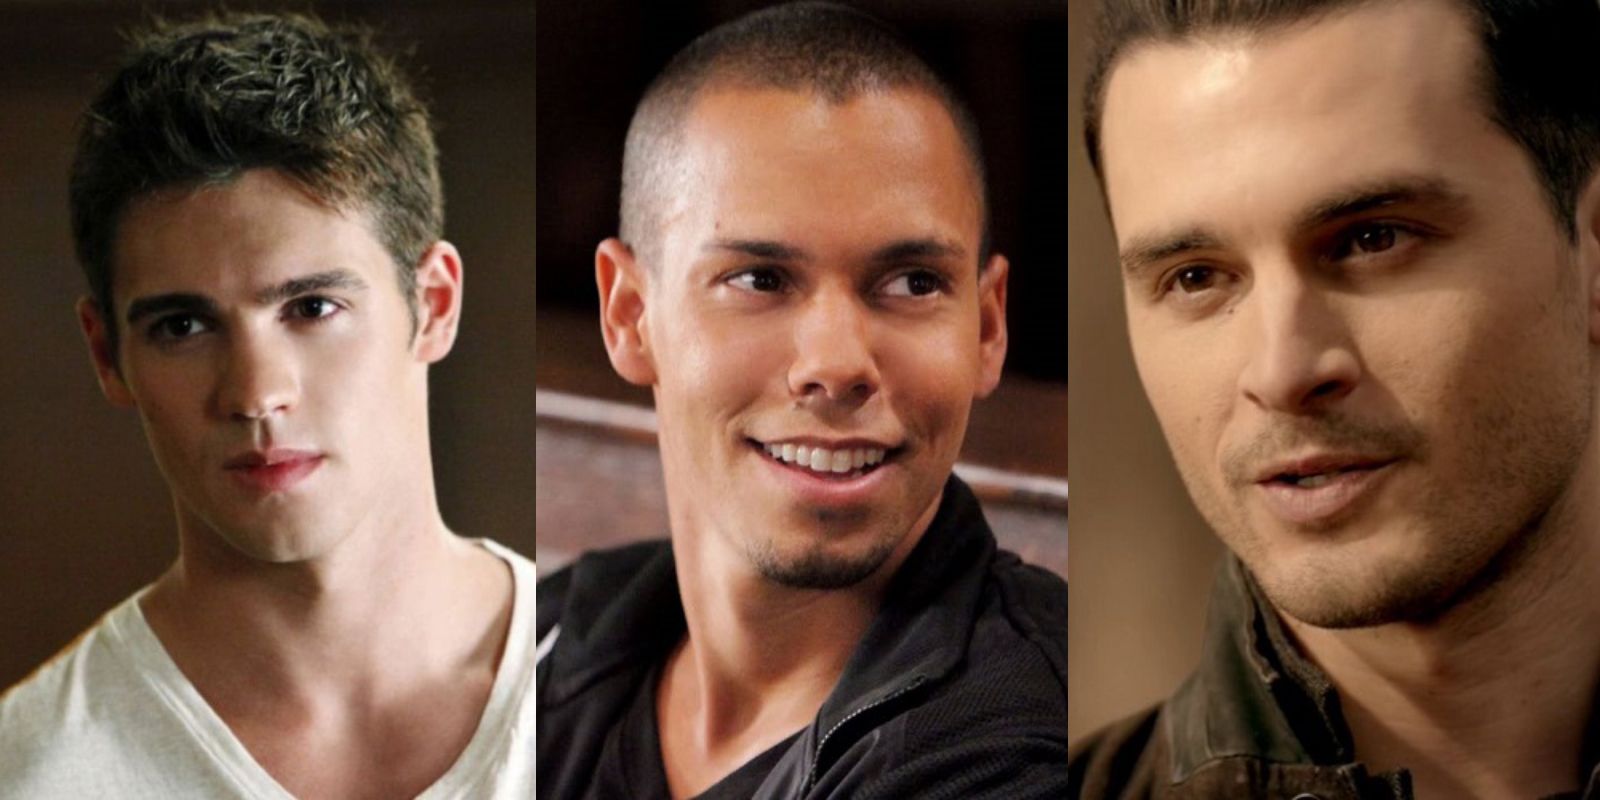 Which Vampire Diaries boy would be your bae?